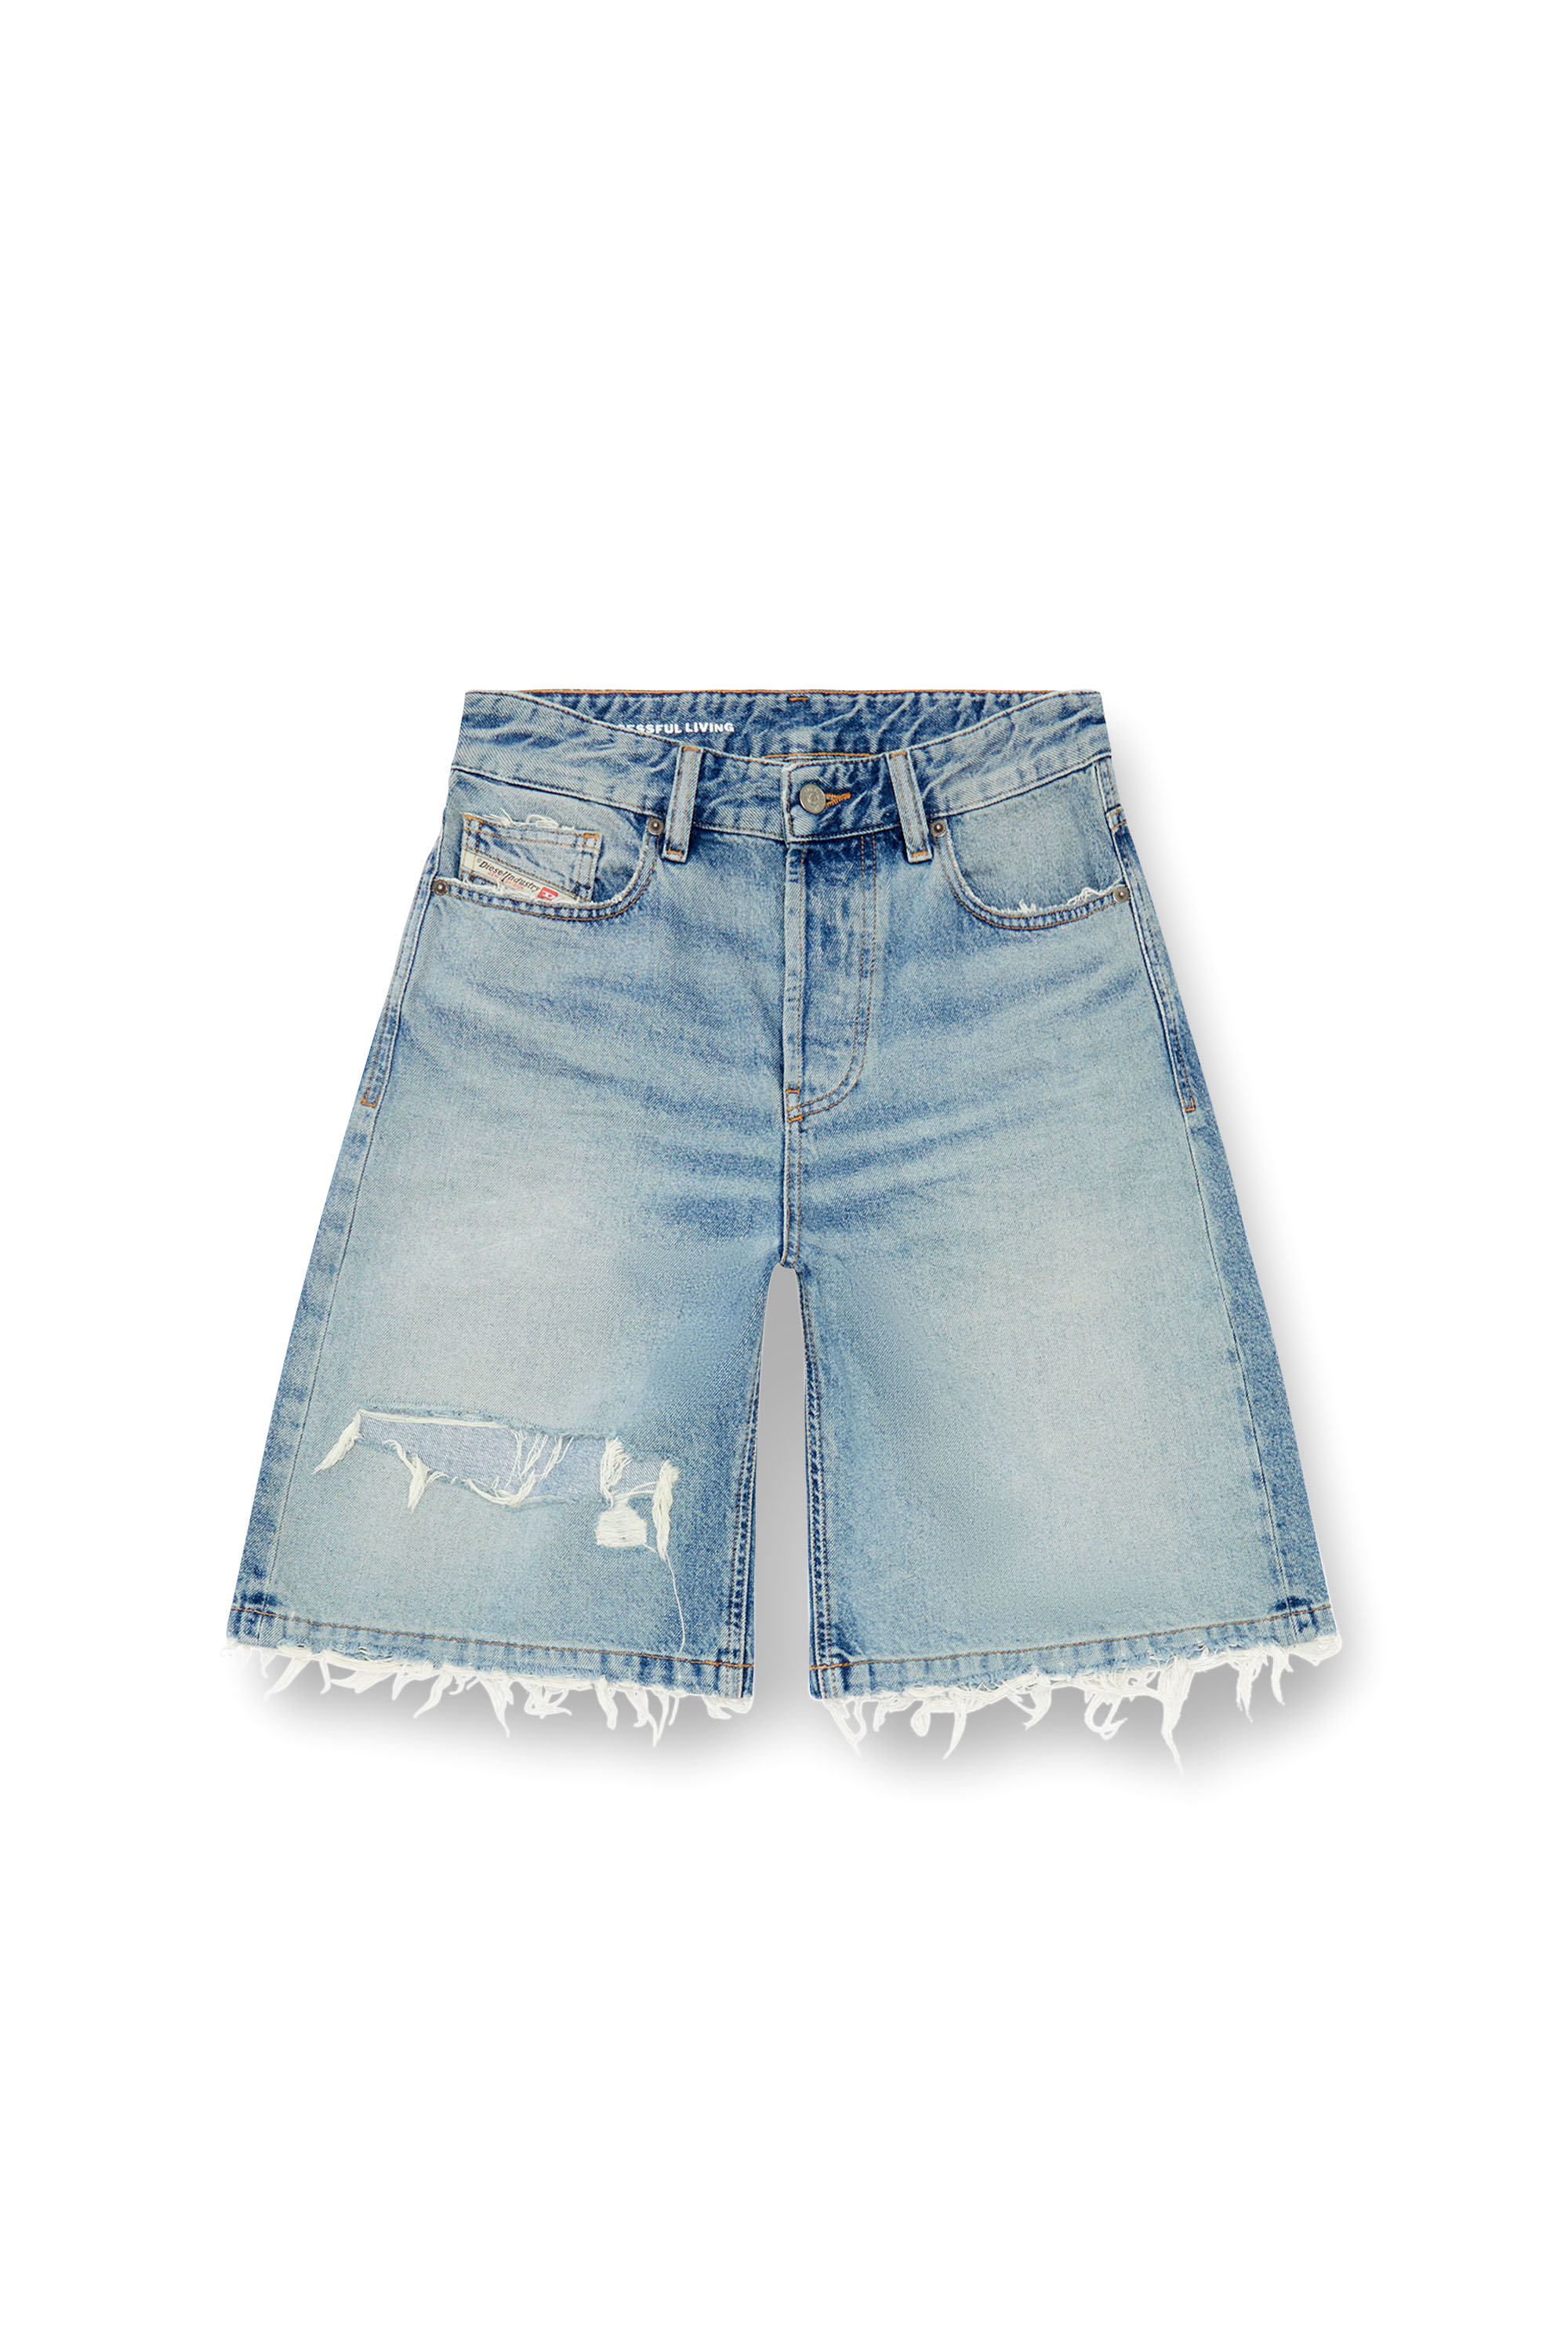 Diesel - DE-SIRE-SHORT, Female Shorts in ripped and repaired denim in ブルー - Image 3